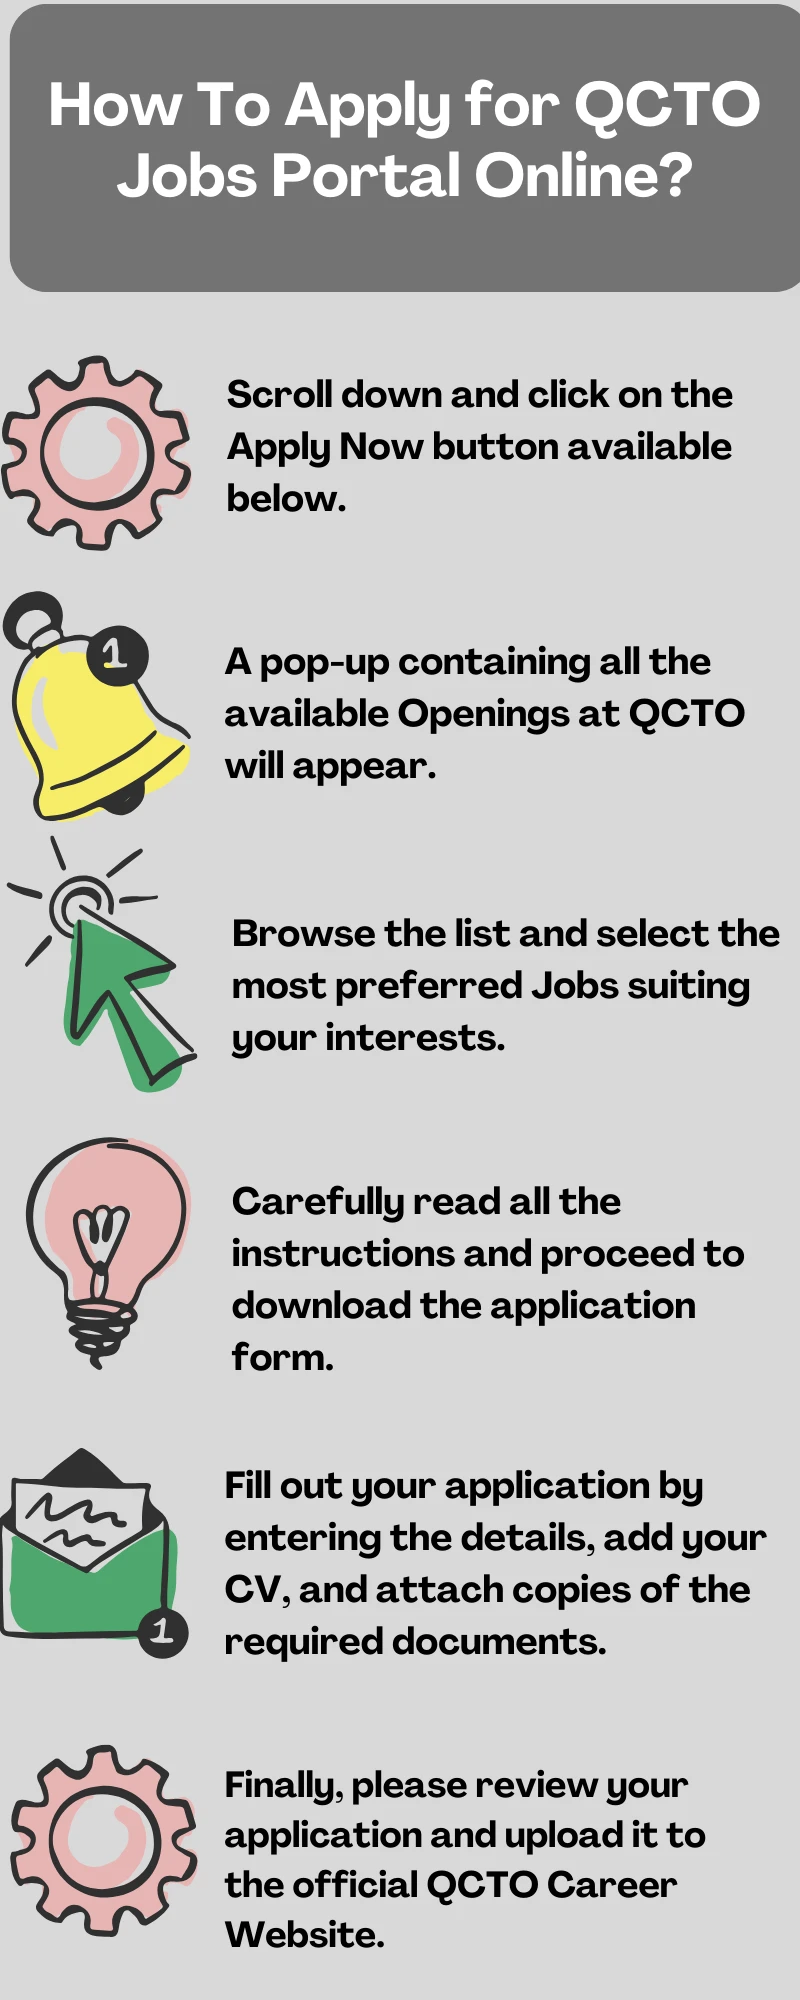 How To Apply for QCTO Jobs Portal Online?